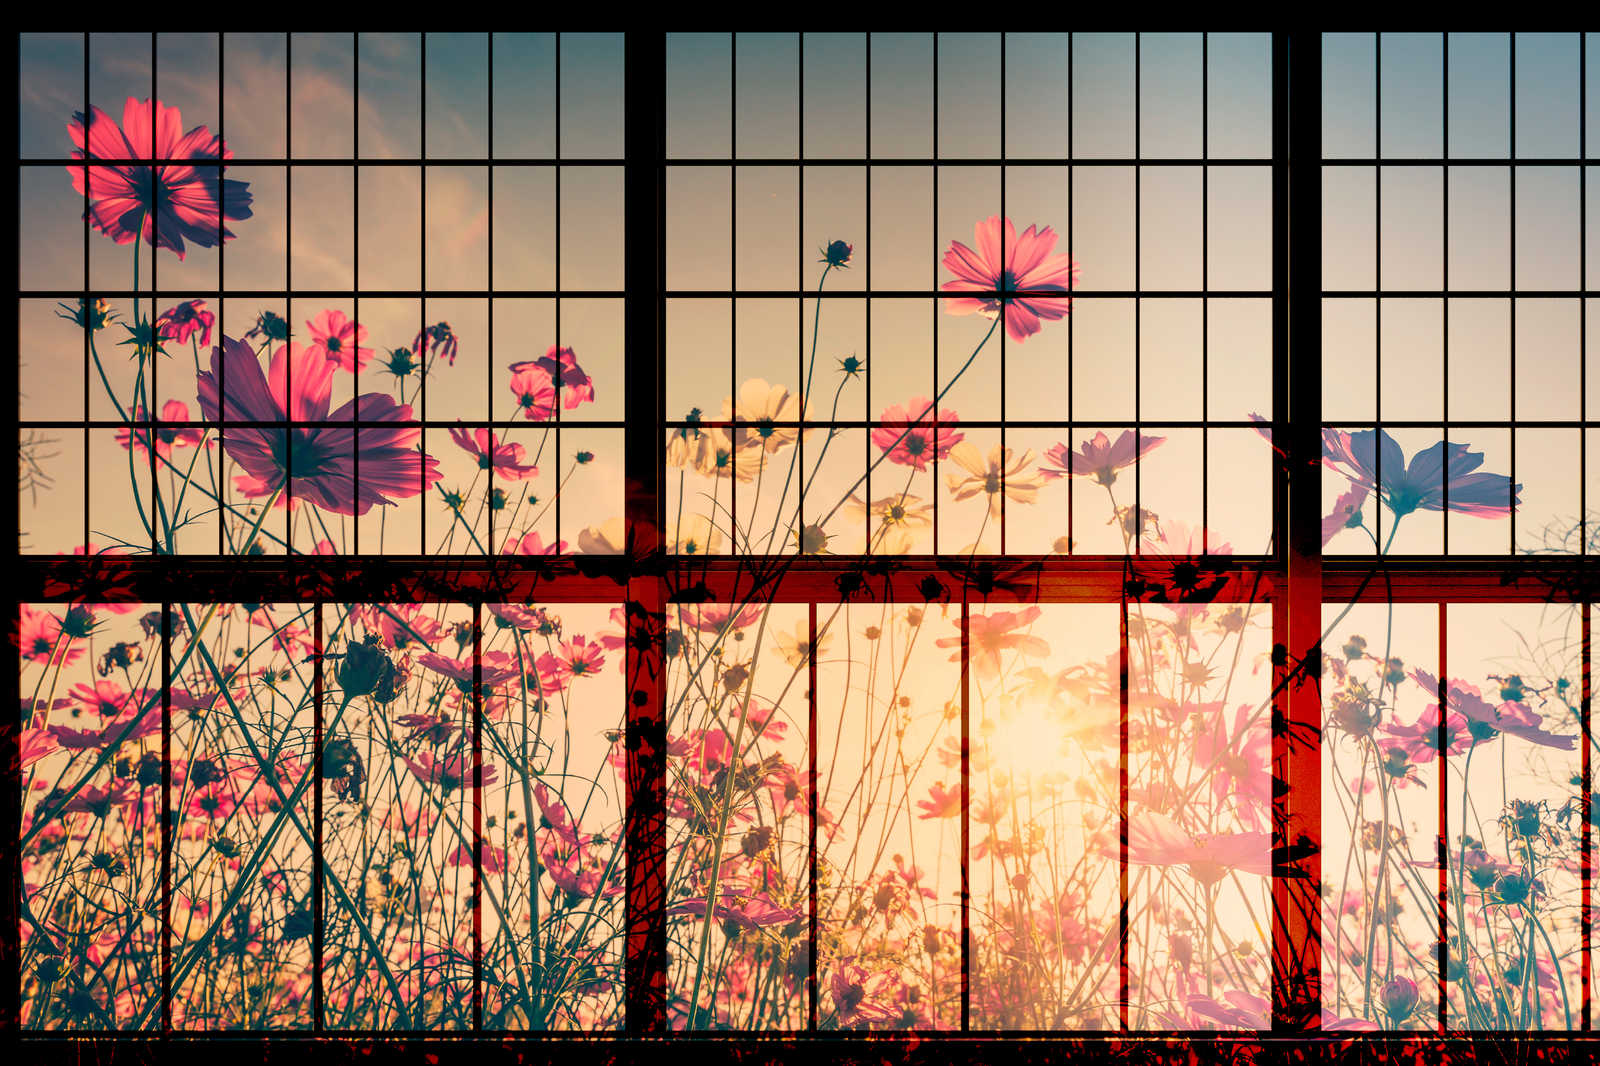             Meadow 1 - Muntin Window Canvas Painting with Flower Meadow - 1.20 m x 0.80 m
        